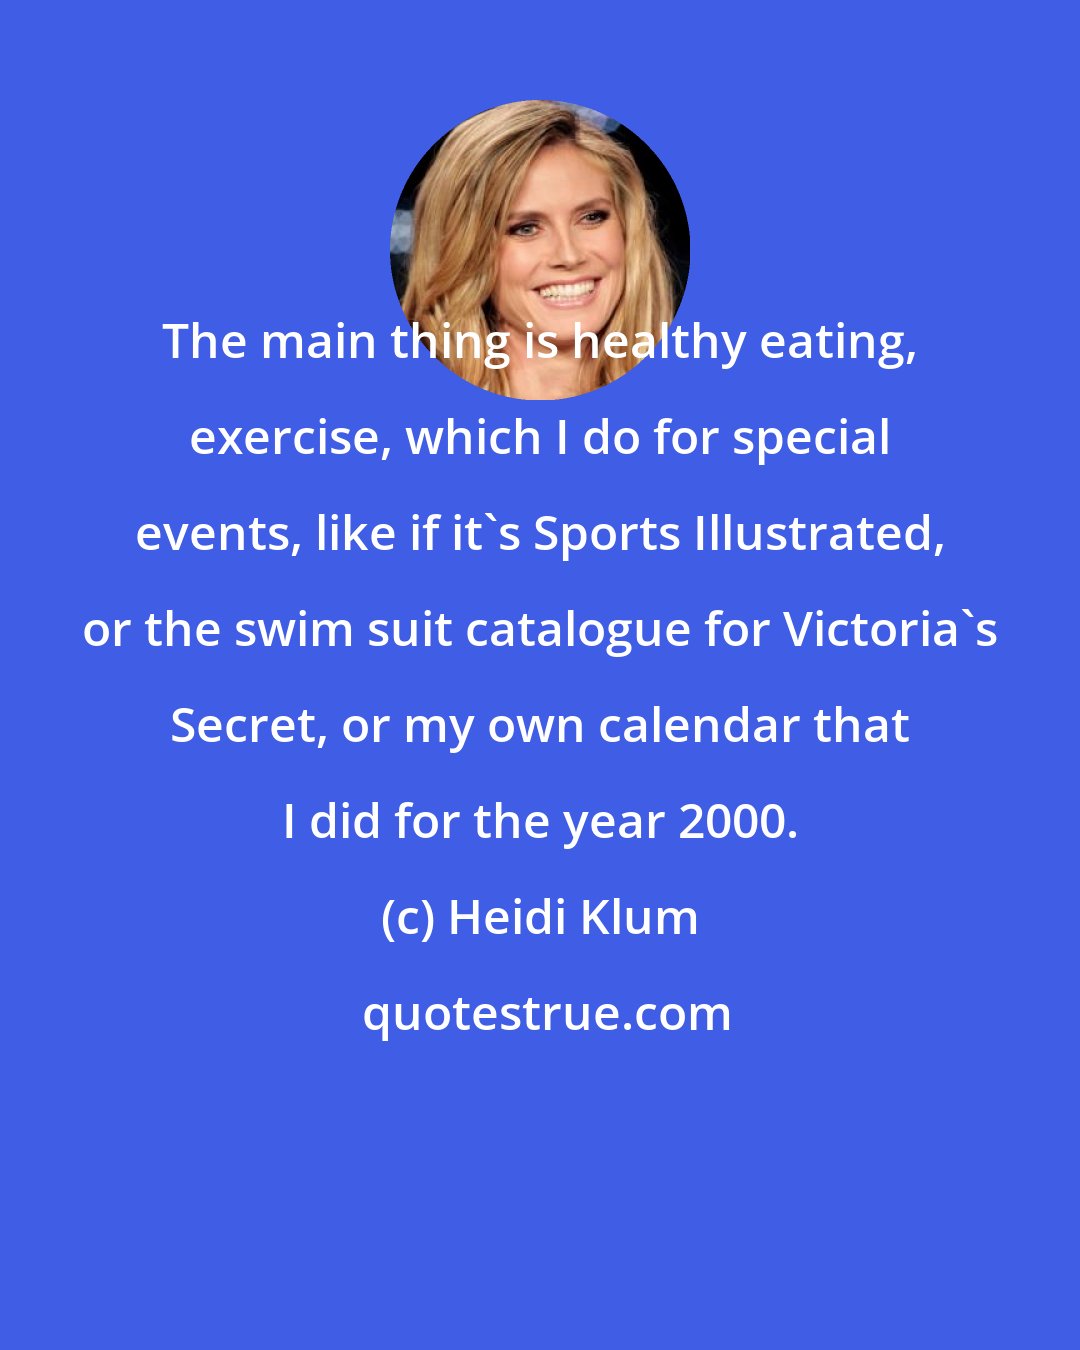 Heidi Klum: The main thing is healthy eating, exercise, which I do for special events, like if it's Sports Illustrated, or the swim suit catalogue for Victoria's Secret, or my own calendar that I did for the year 2000.